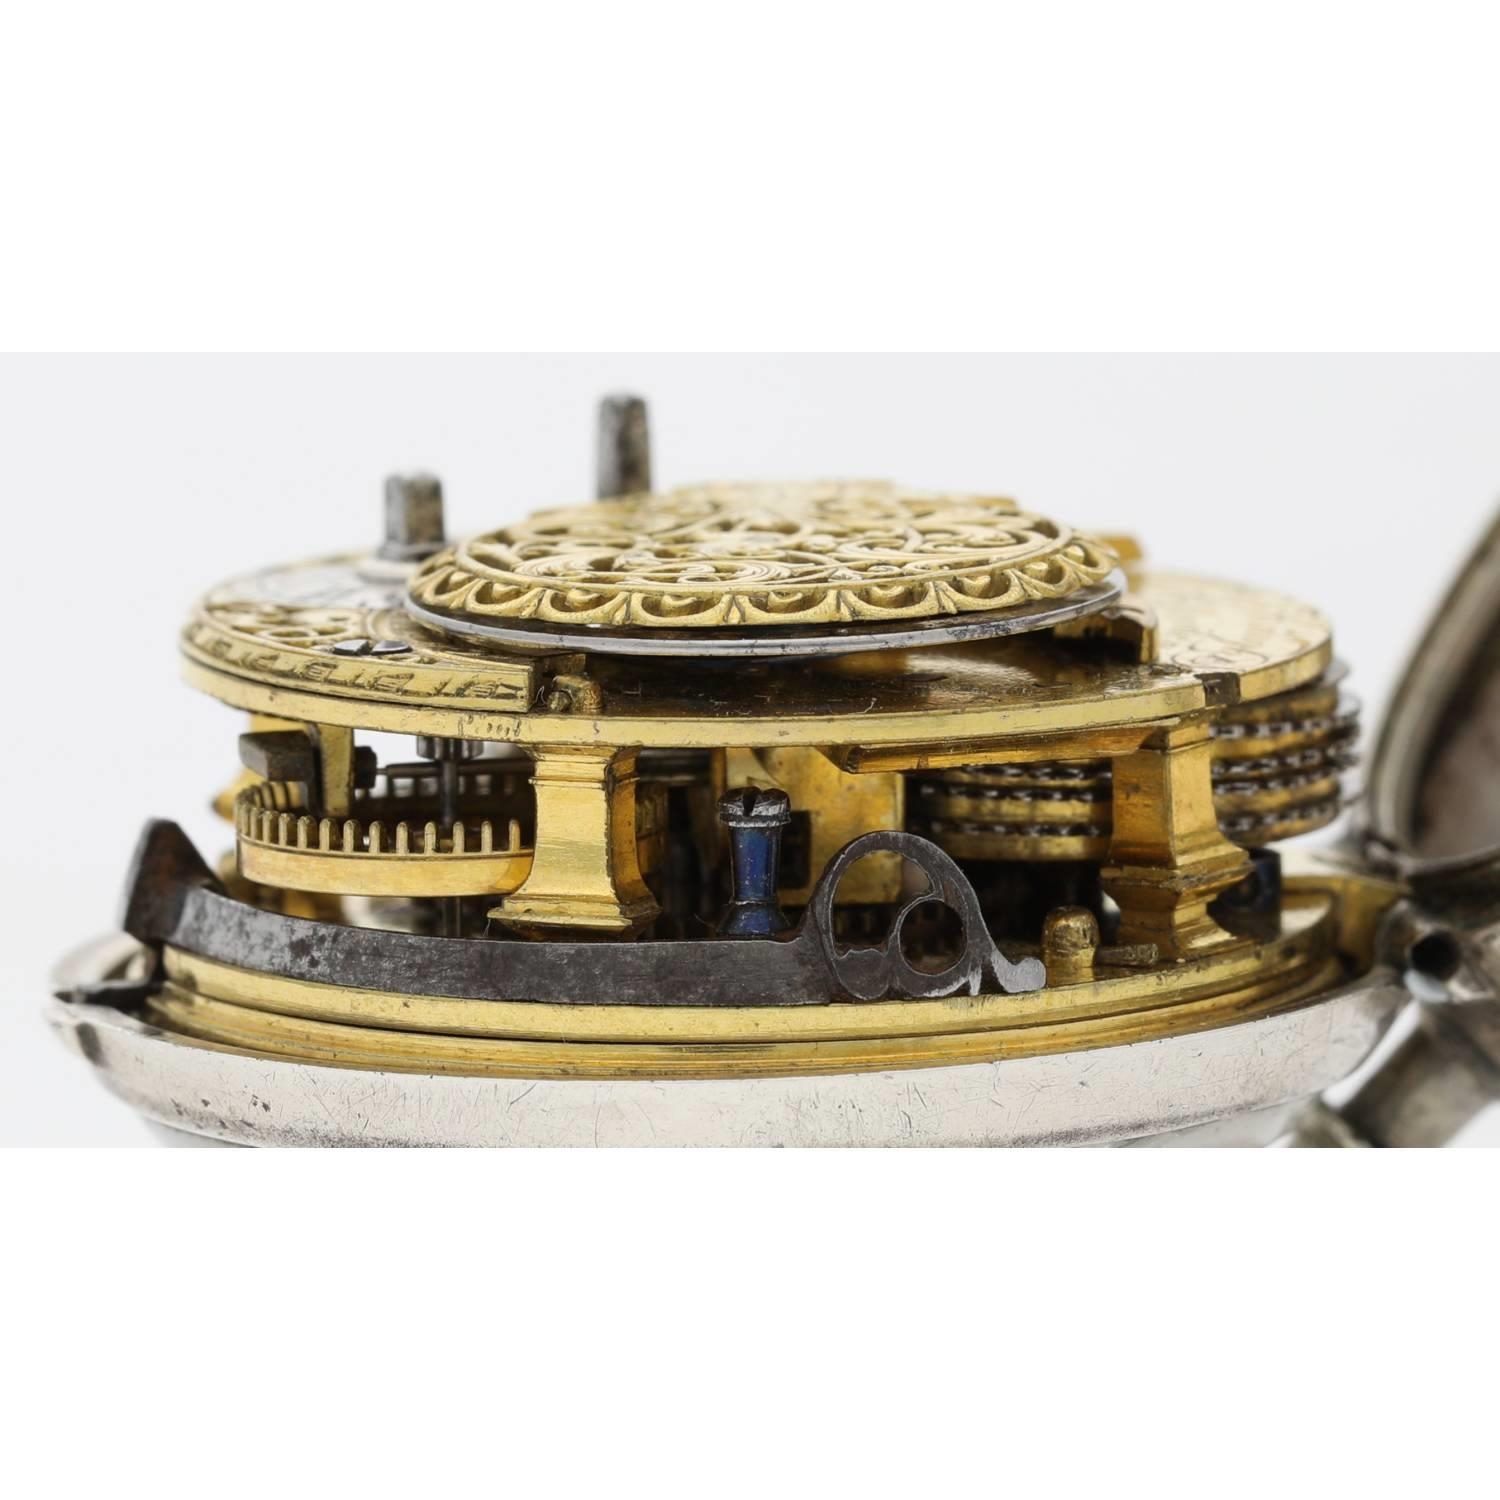 William Knight, West Marden - mid-18th century English silver pair cased verge pocket watch, - Image 7 of 10